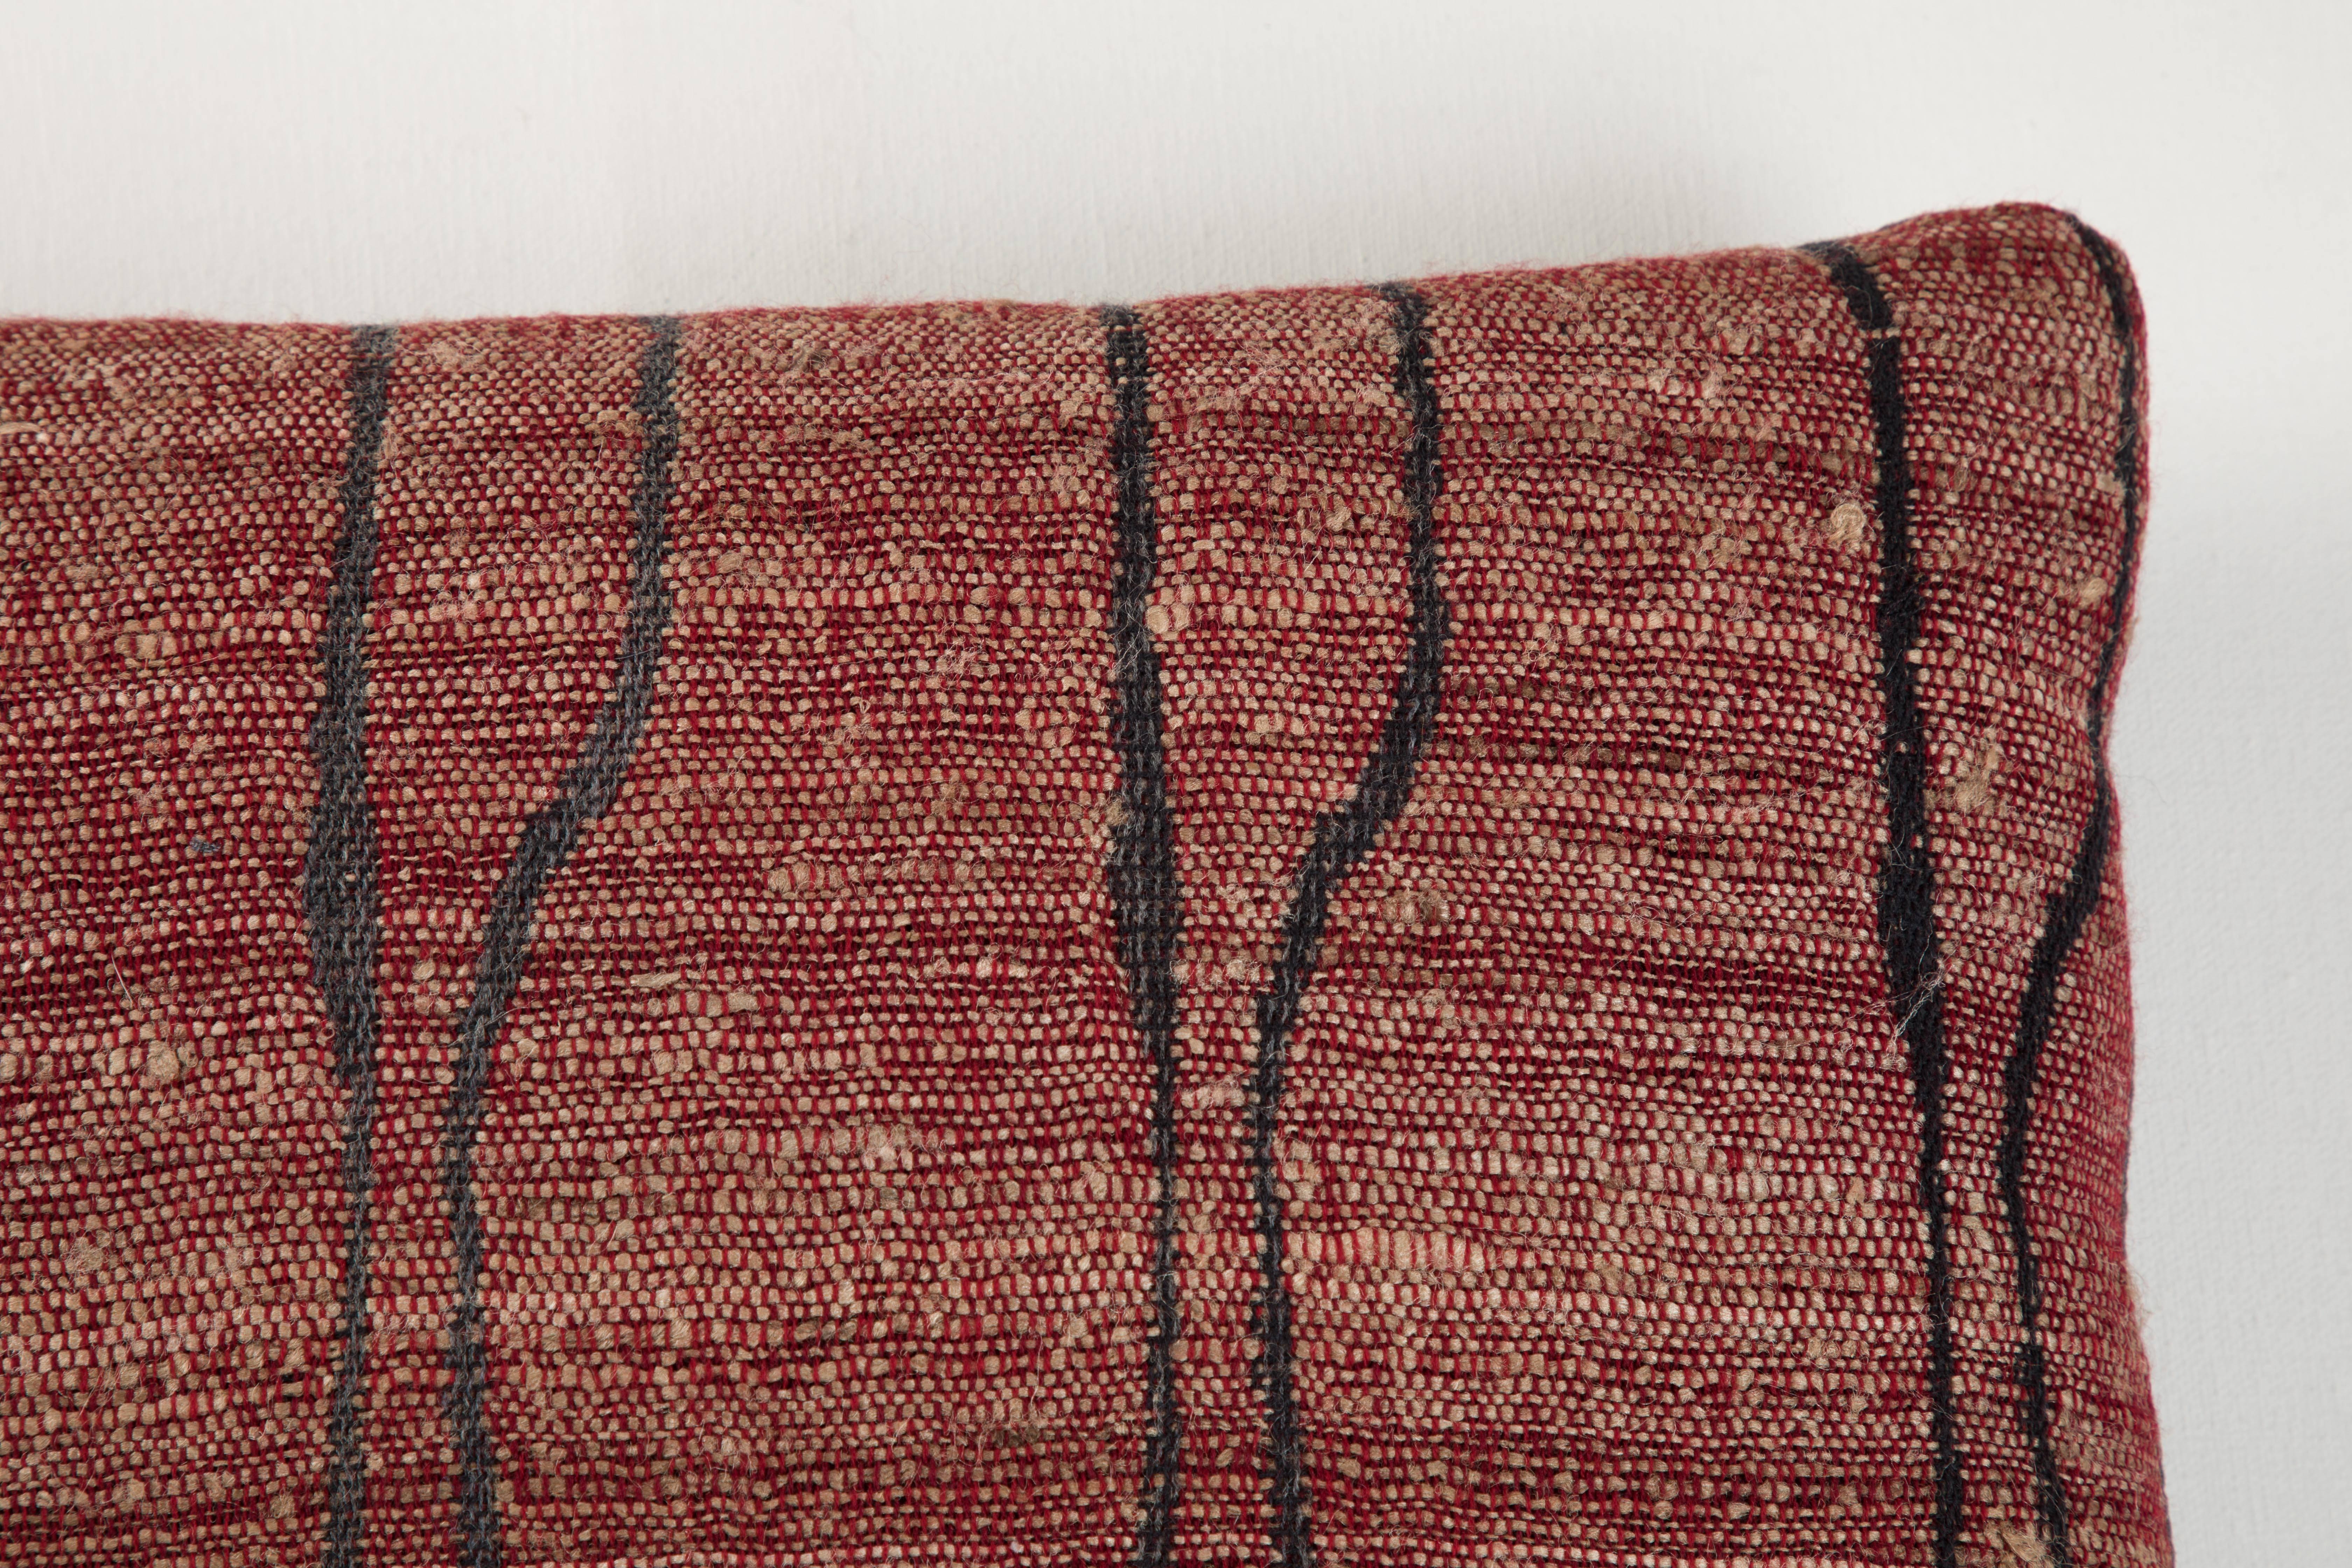 Pat McGann Workshop 
A contemporary line of cushions, pillows, throws, bedcovers, bedspreads and yardage hand woven in India on antique Jacquard looms. Hand spun wool, cotton, linen, and raw silk give the textiles an appealing uneven quality. Sizes